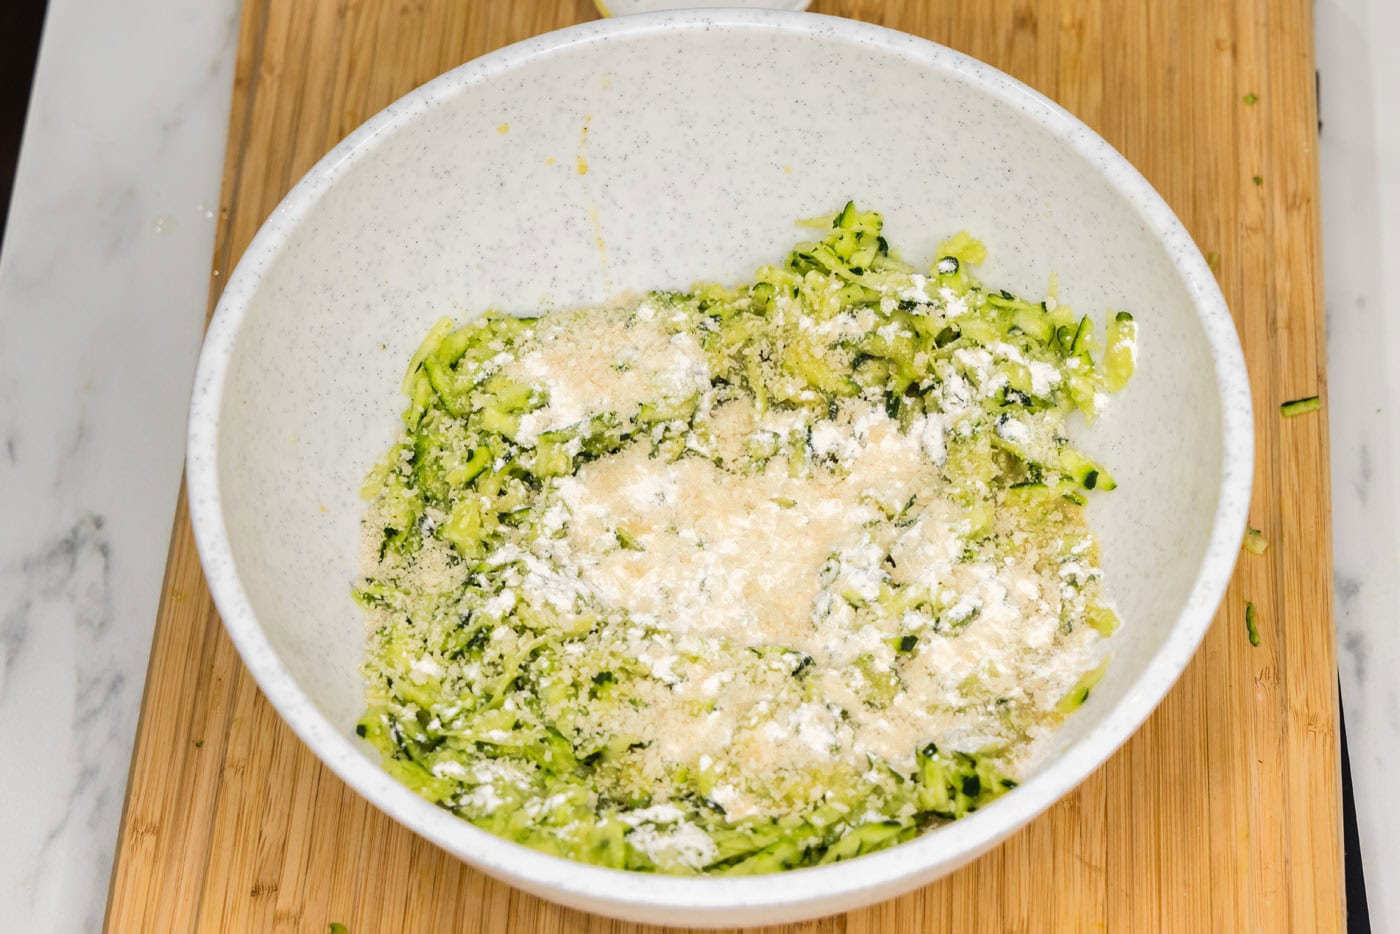 flour and breadcrumbs added to shredded zucchini mixture in a bowl